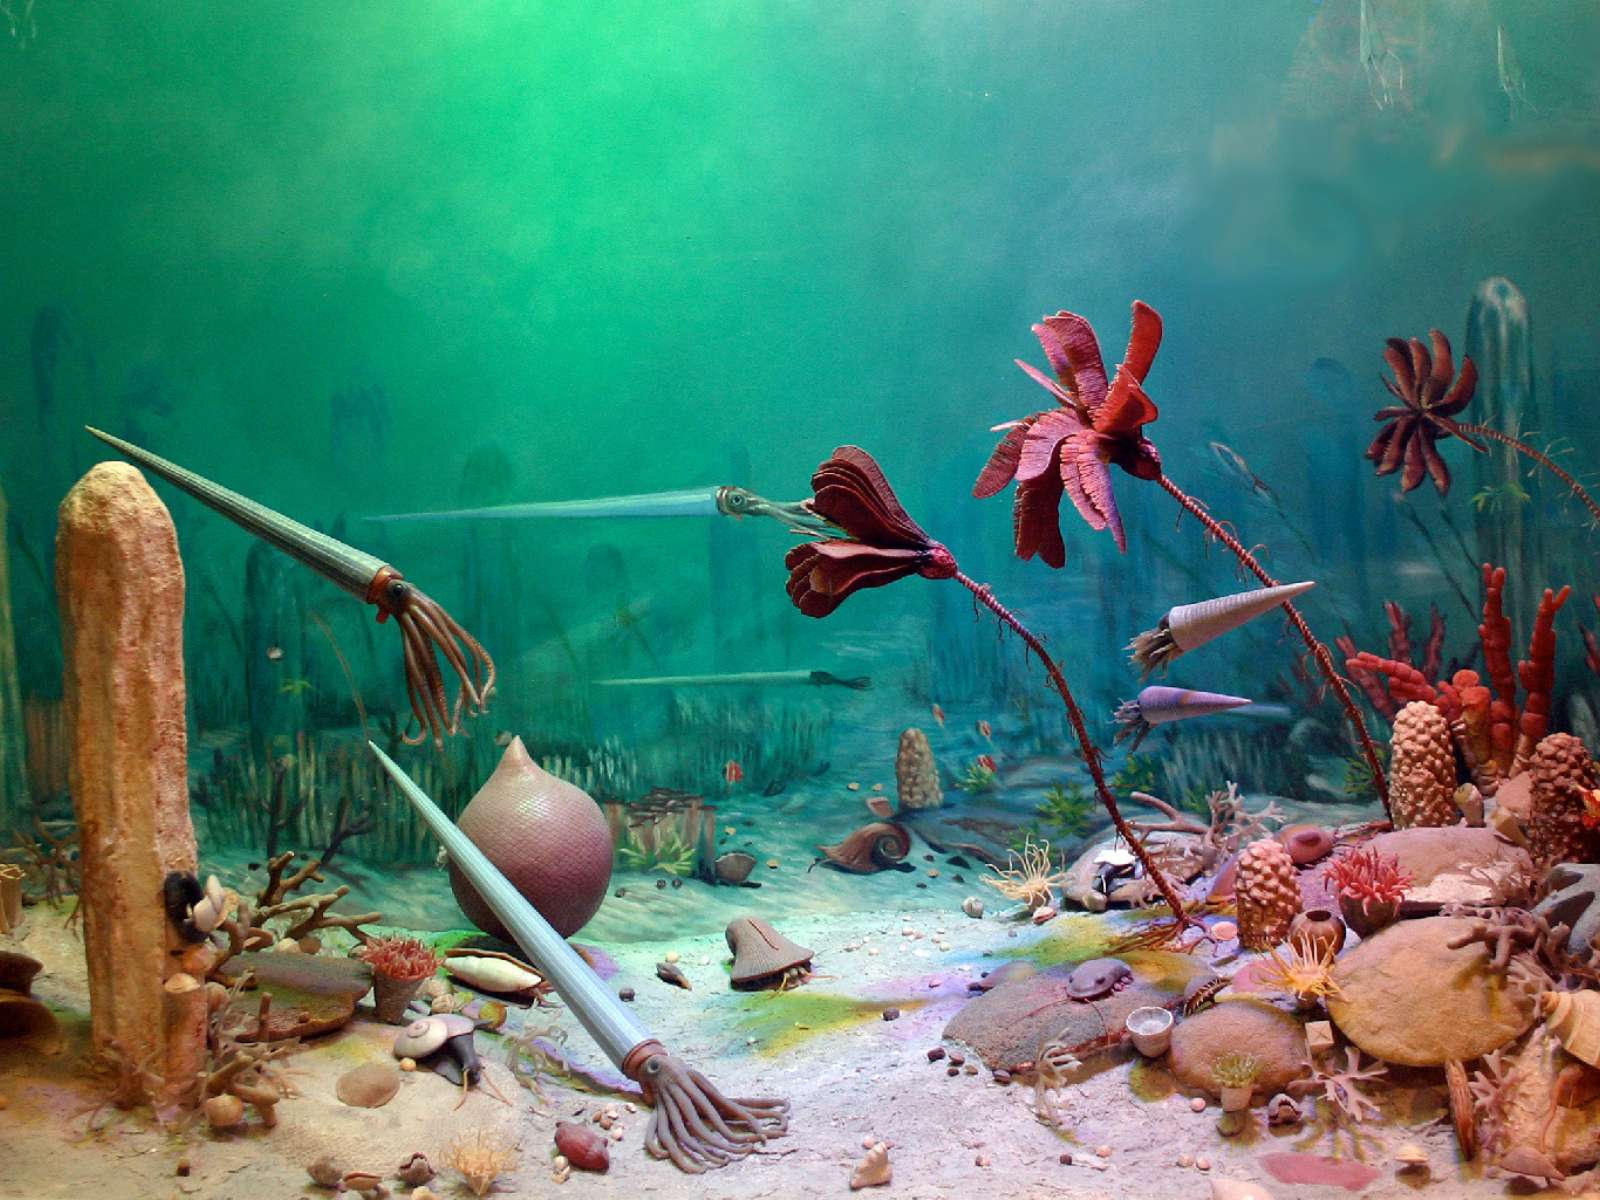 View into a Museum diorama. Seafloor scene showing various corals, sponges, seaweeds, and sea creatures.